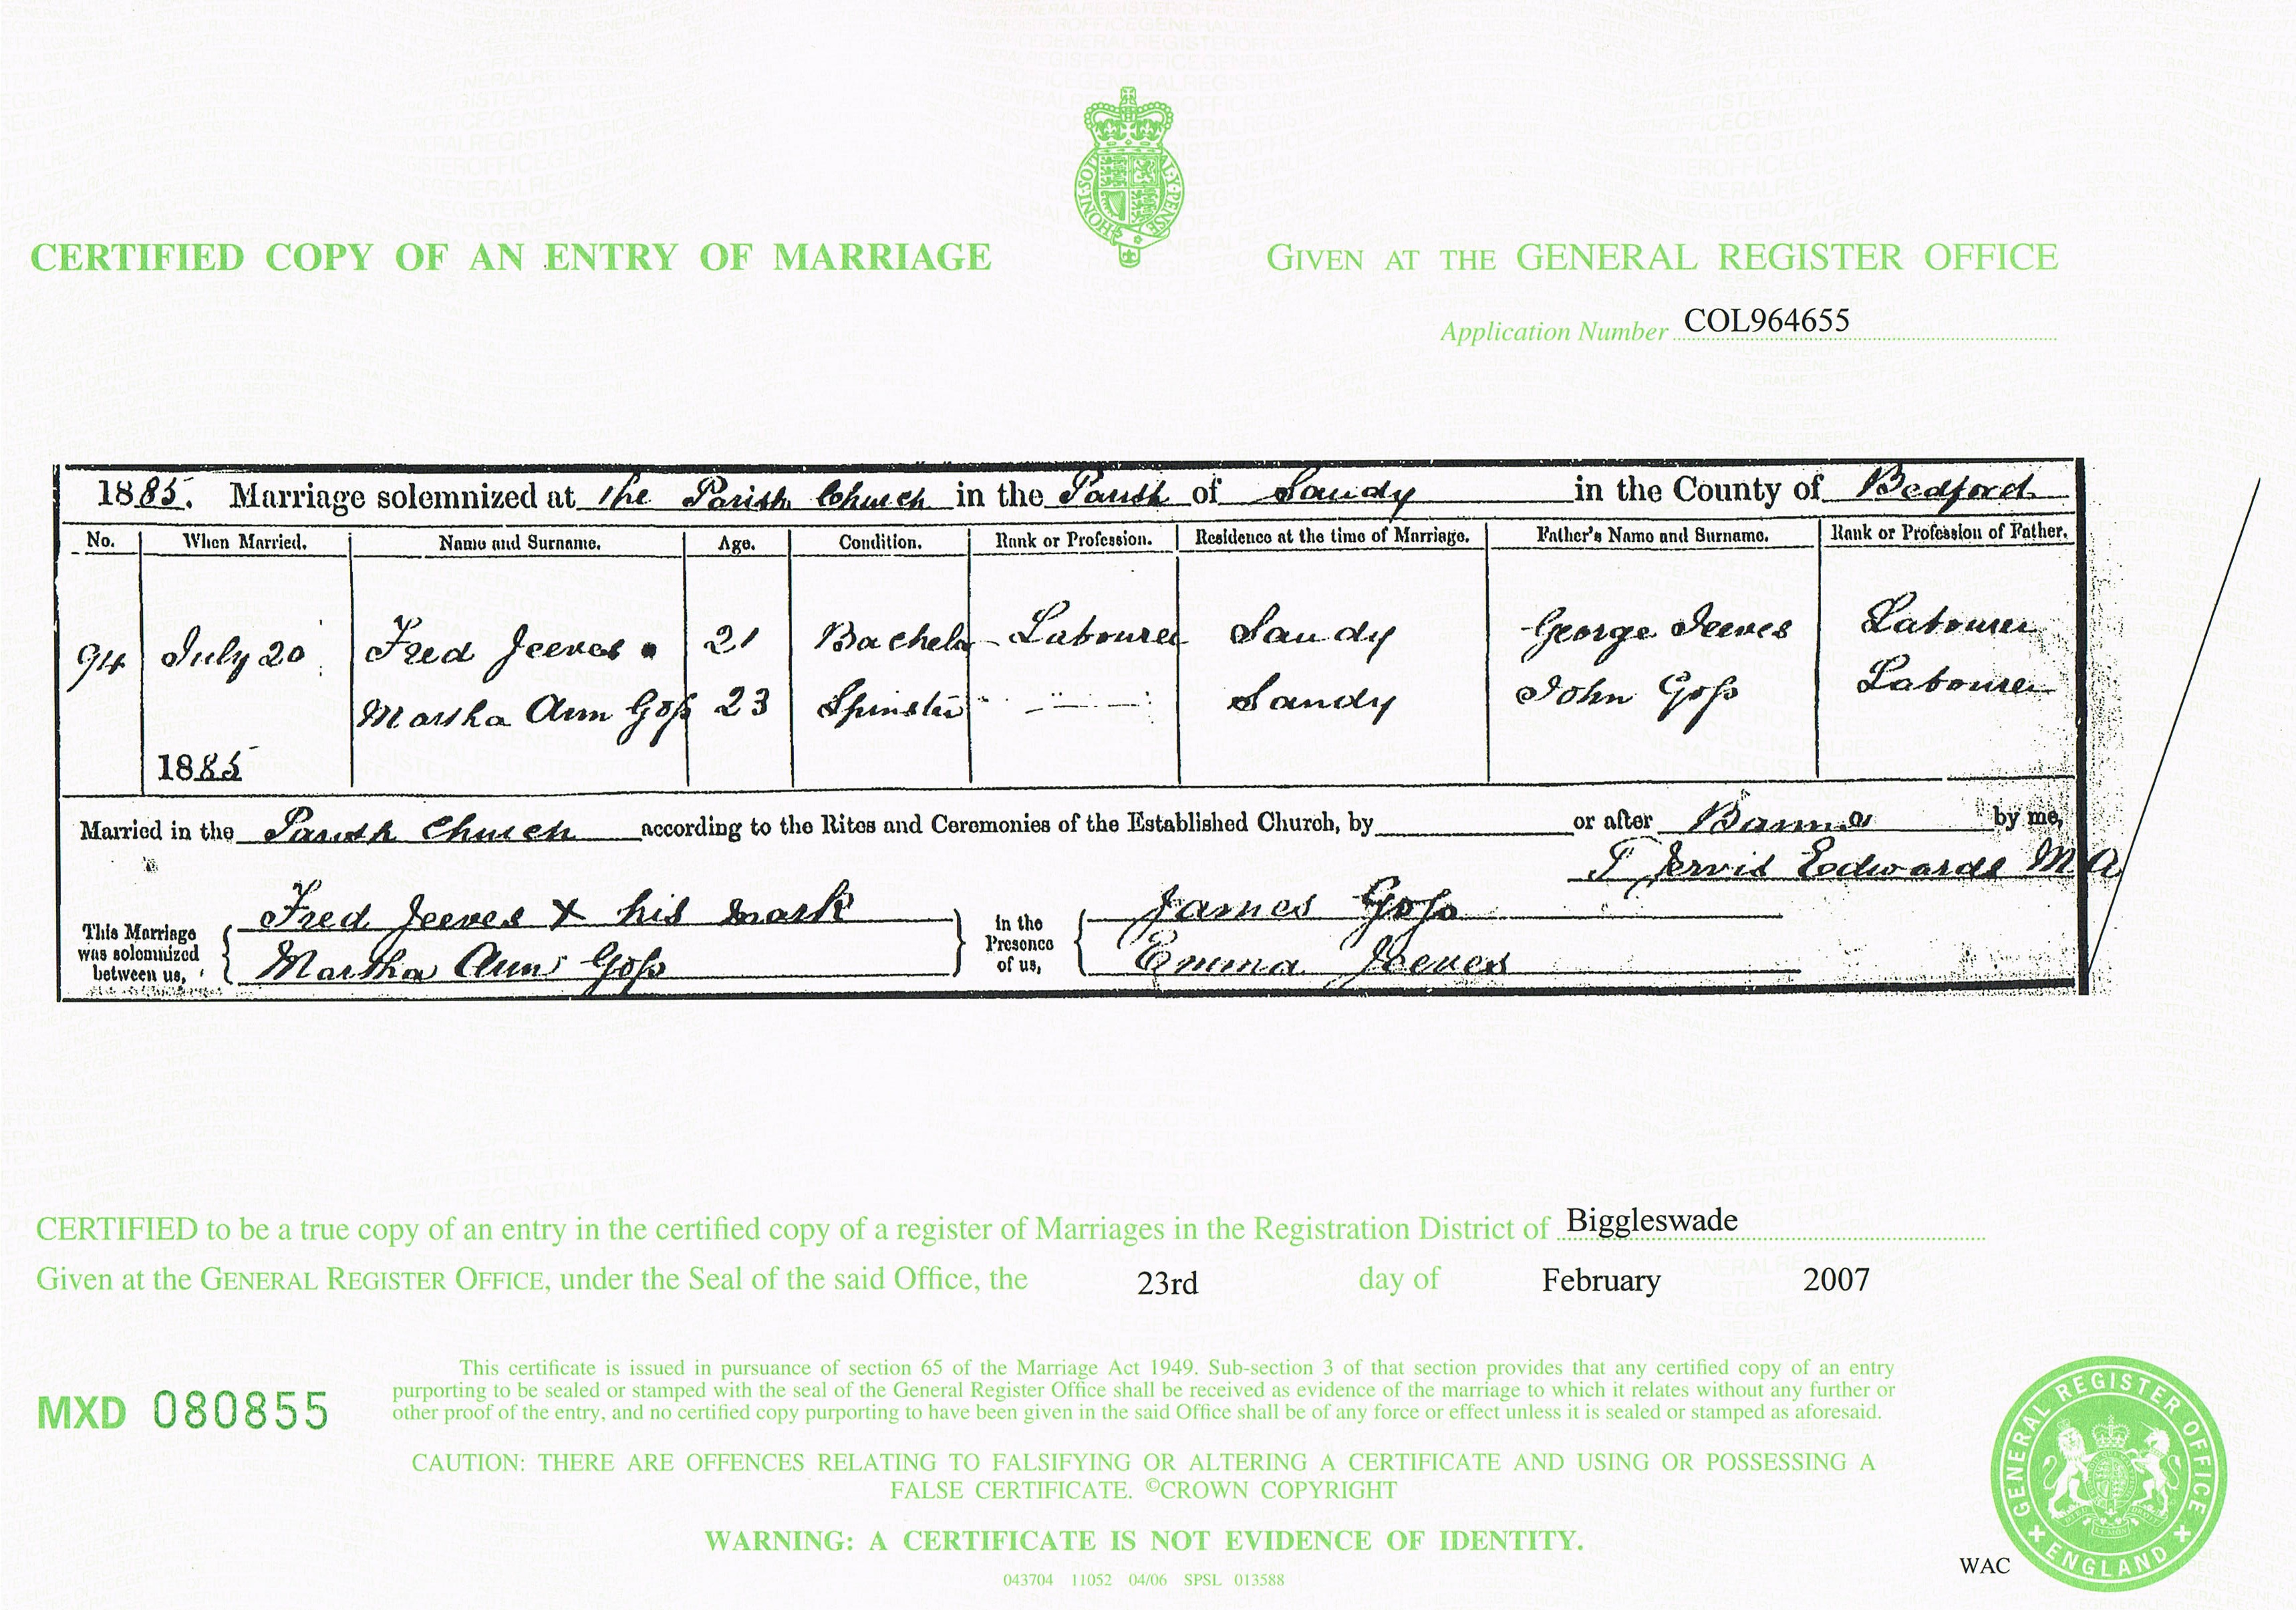 1885 marriage of Martha Ann Goss to Fred Jeeves